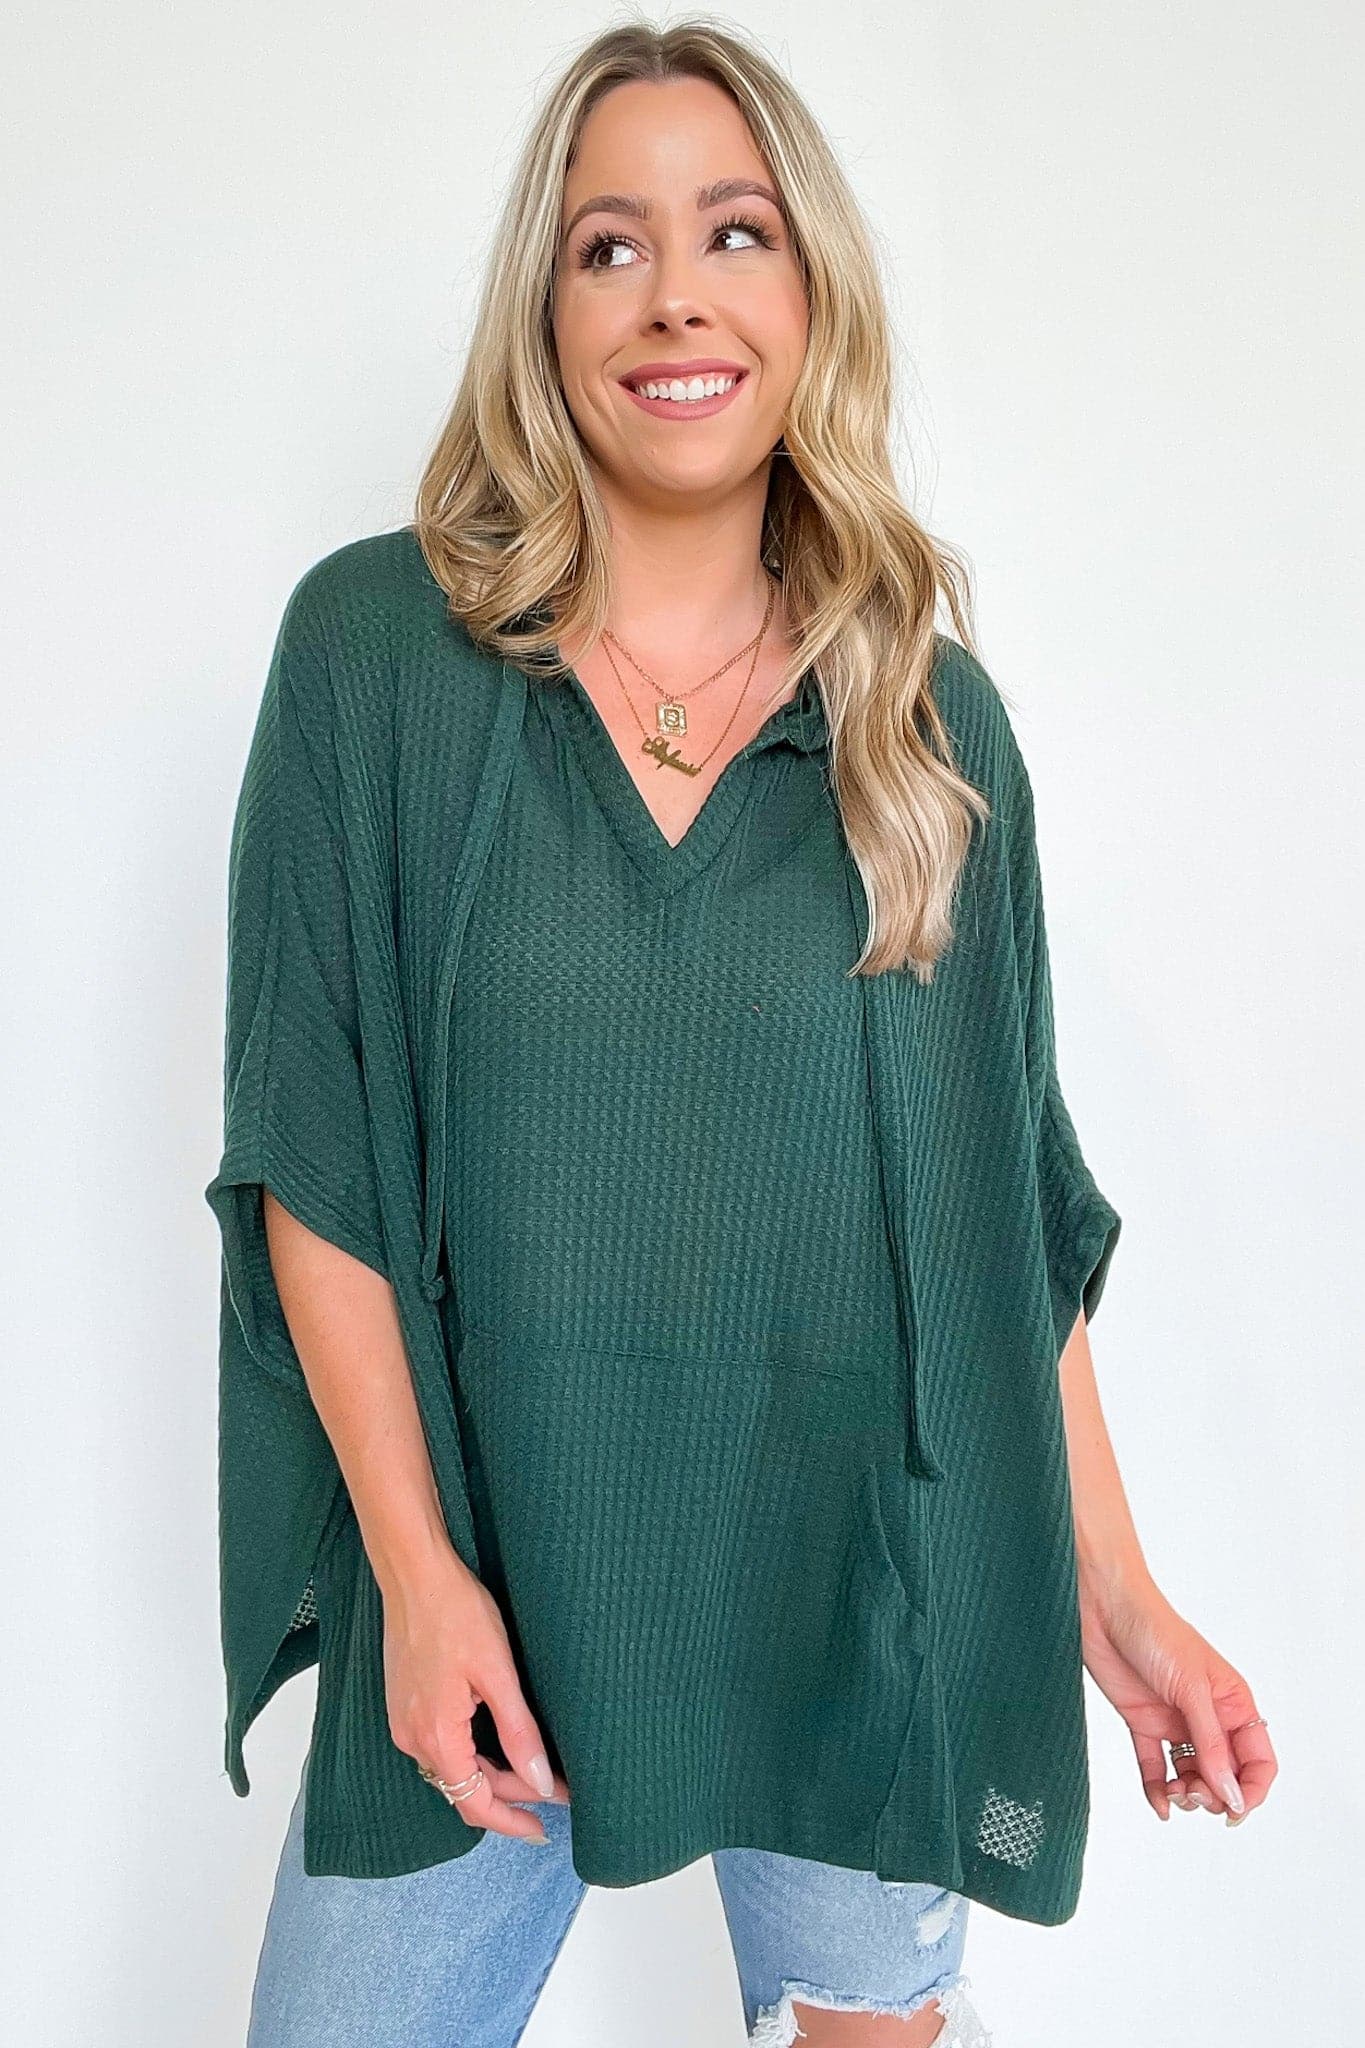 Hunter Green / S Indrah Relaxed Fit Thermal Pocket Top - FINAL SALE - Madison and Mallory